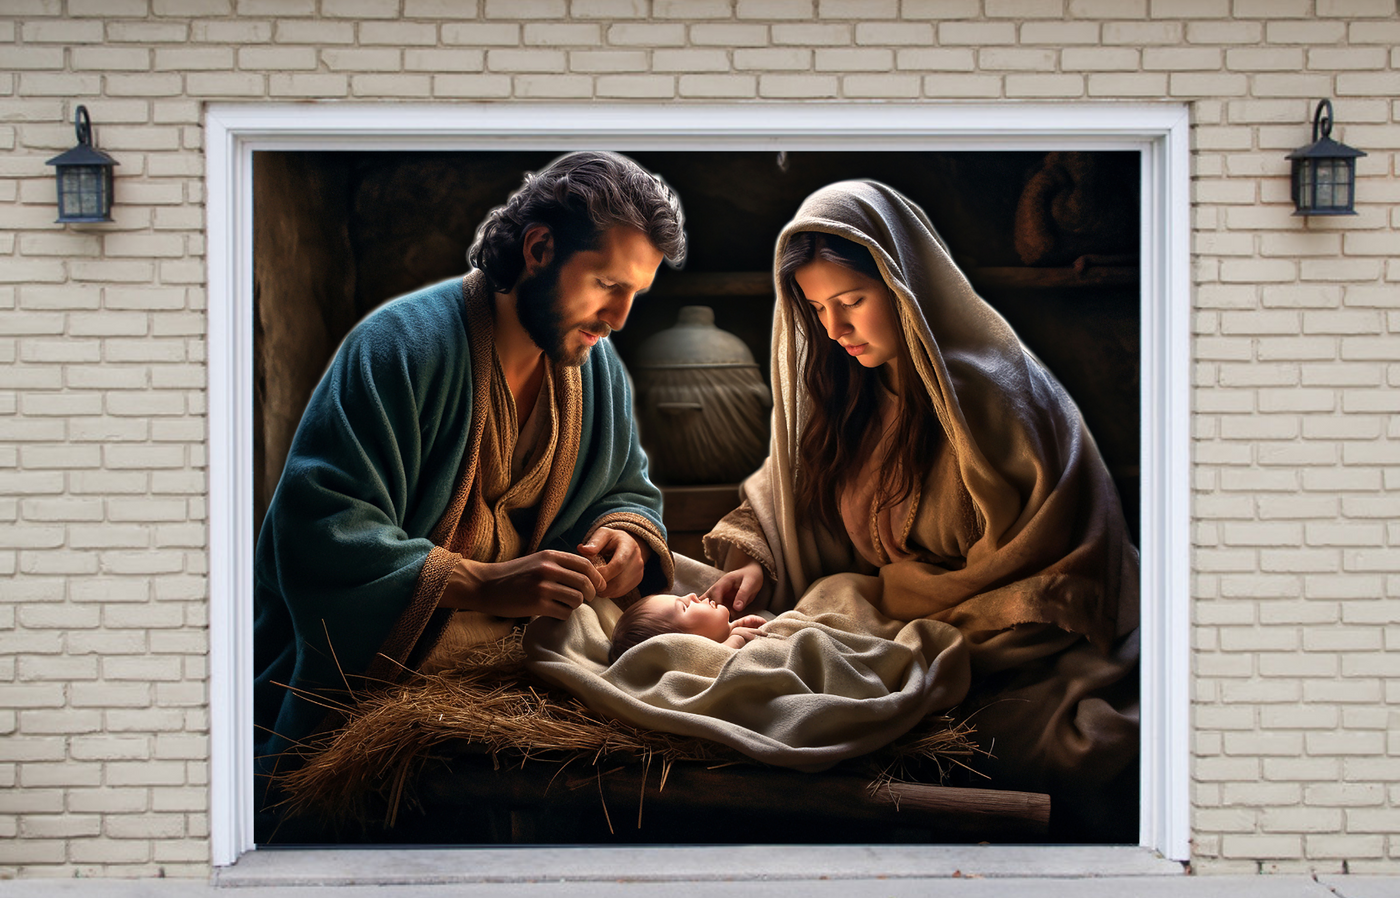 The Holy Family Jesus, Mary and Joseph Garage Door Cover Wrap